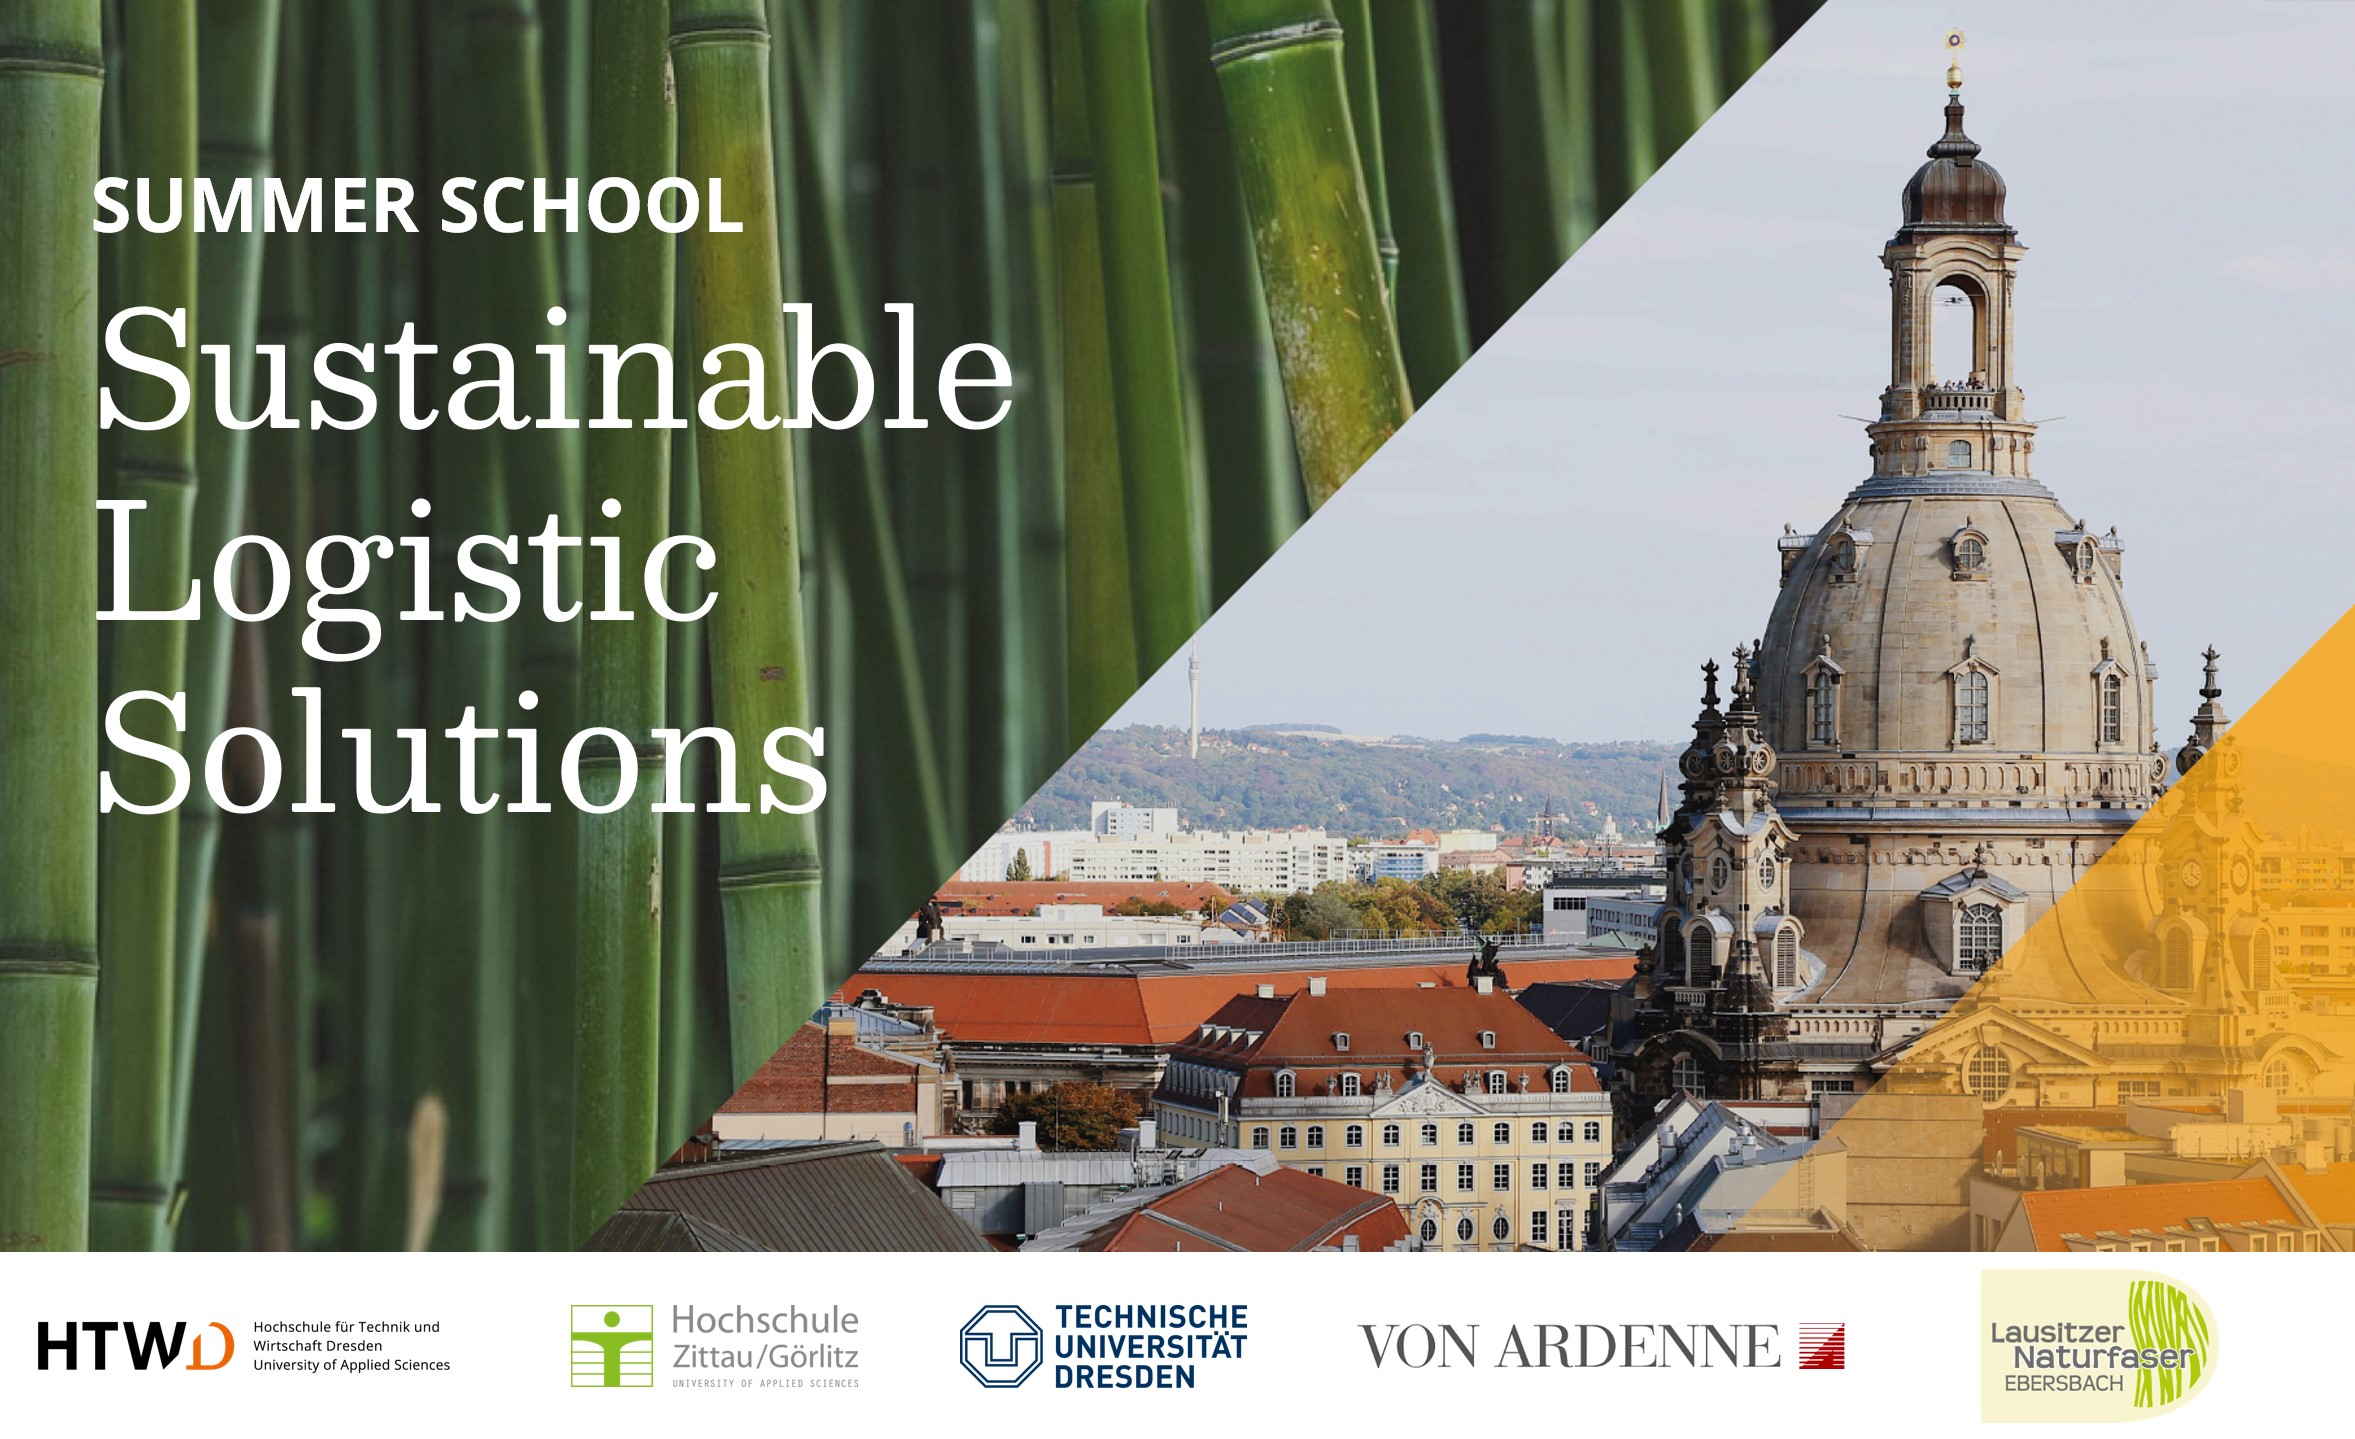 Summer School Sustainable Logistic Solutions